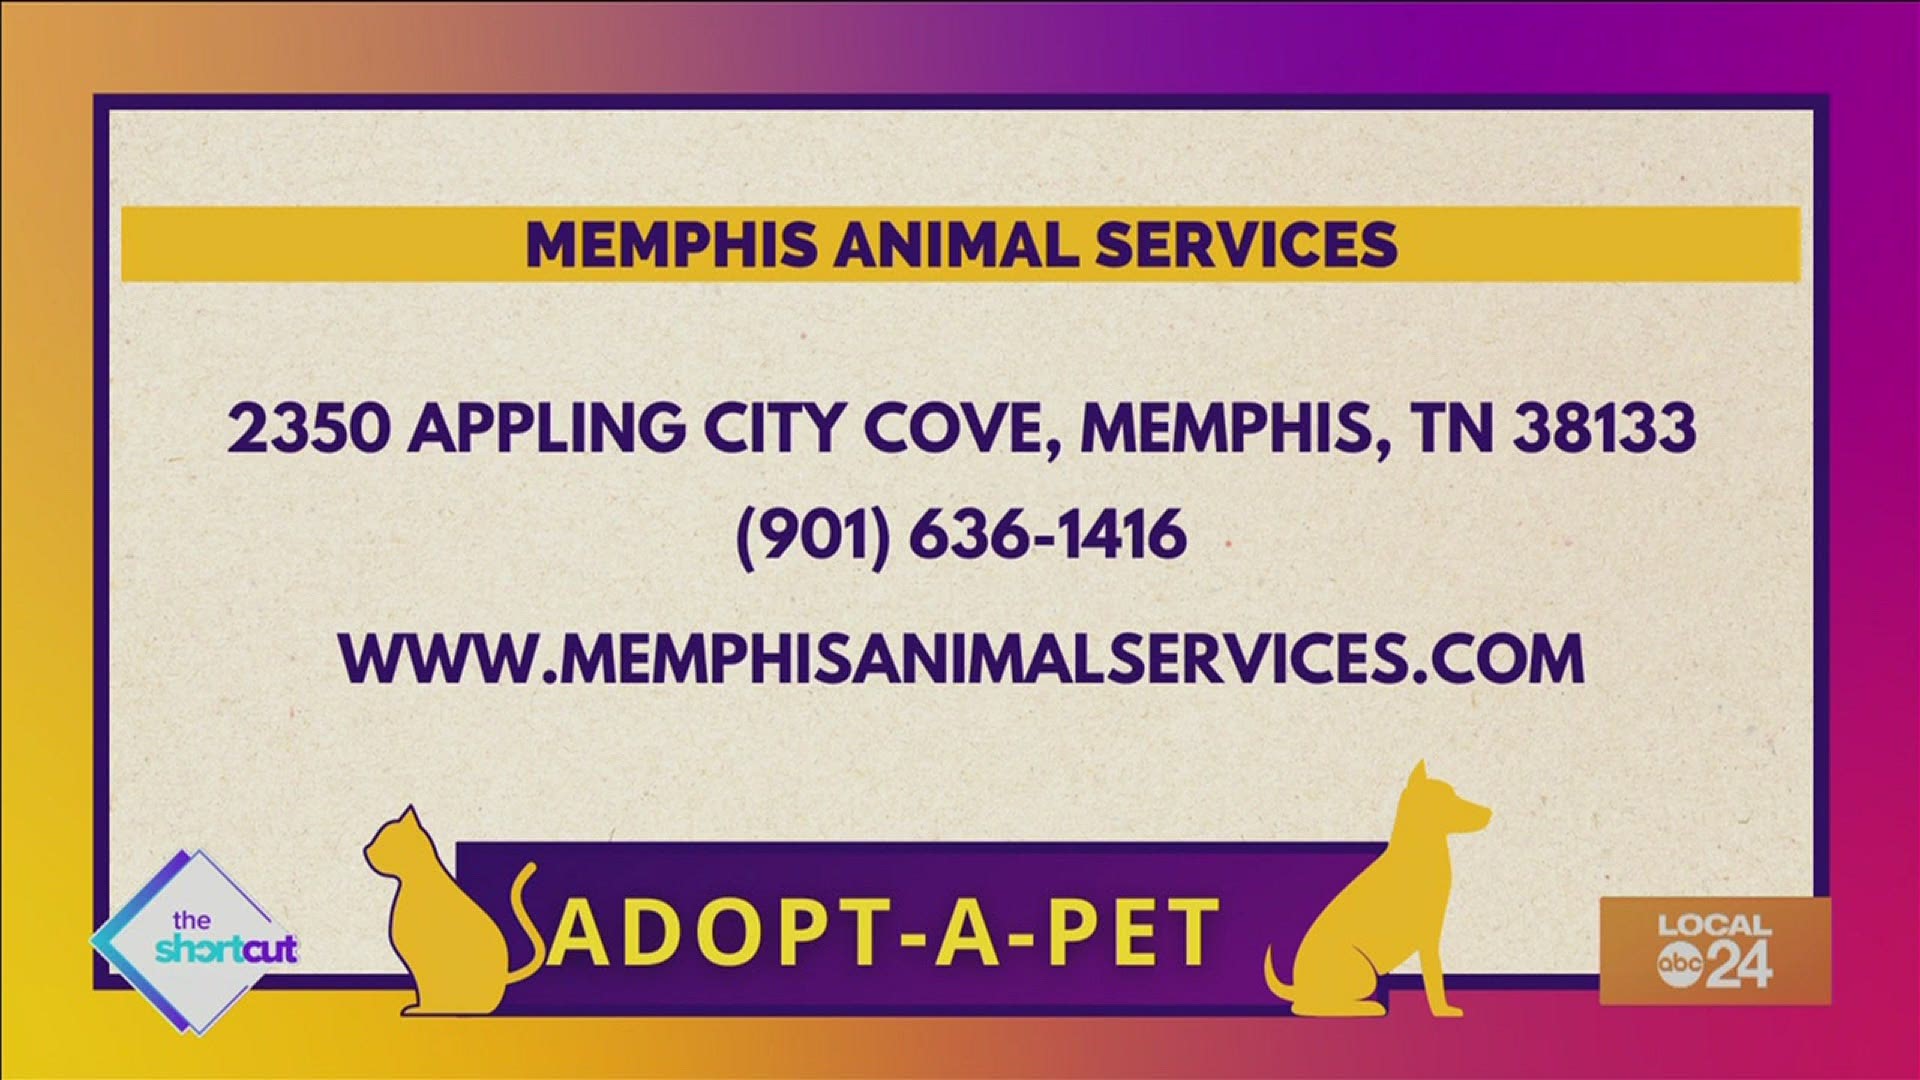 Whether you're a dog or a cat lover, check out what Memphis Animal Services (MAS) has to offer for only $20 per adoption! Starring Sydney Neely on "The Shortcut"!